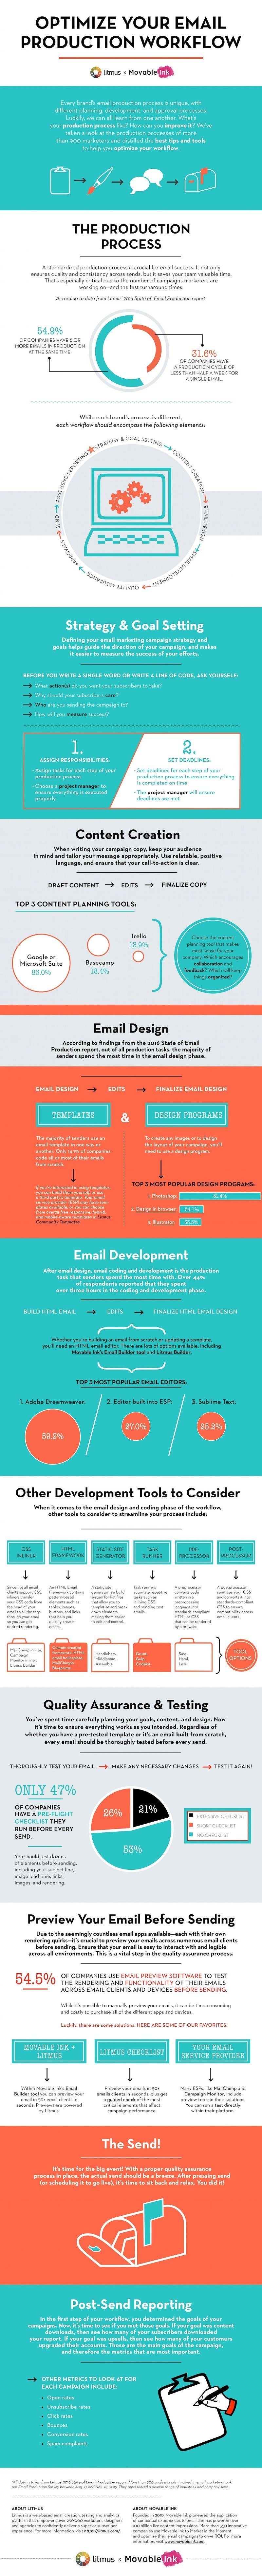 160820-optimize-your-email-production-workflow-infographic